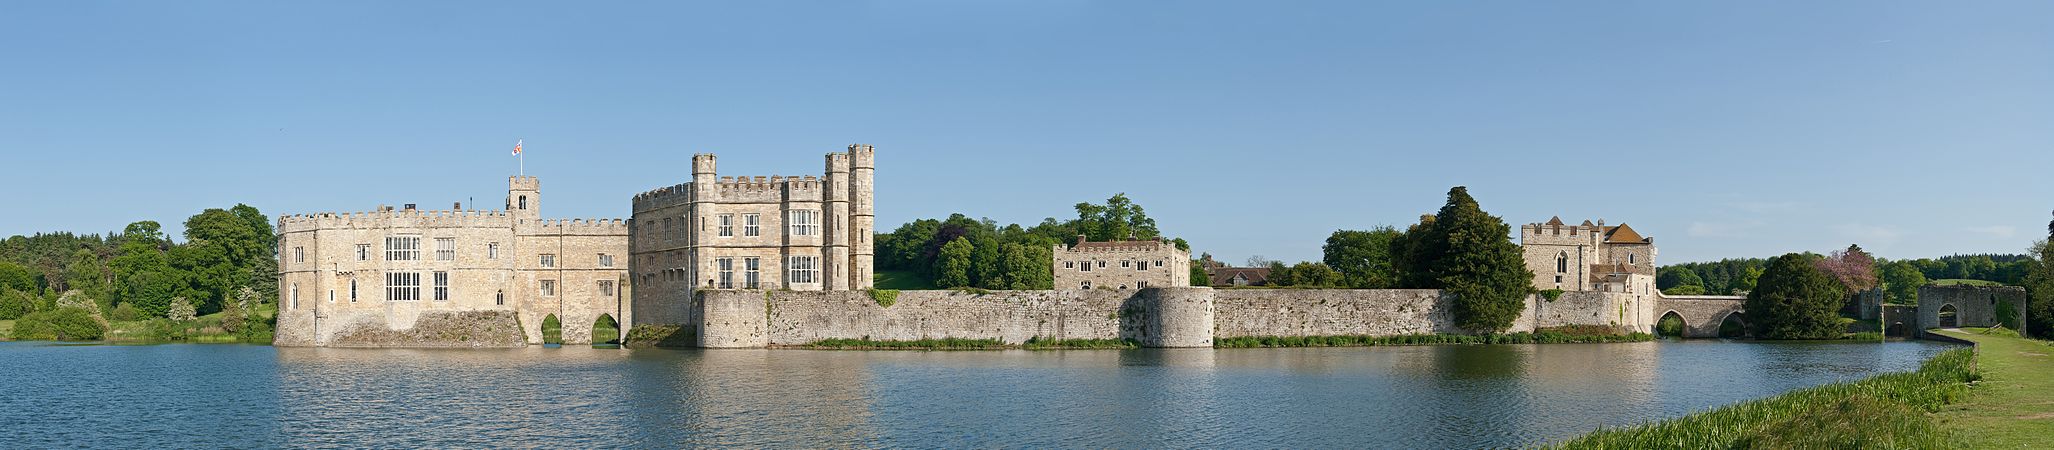 Leeds Castle, by Diliff